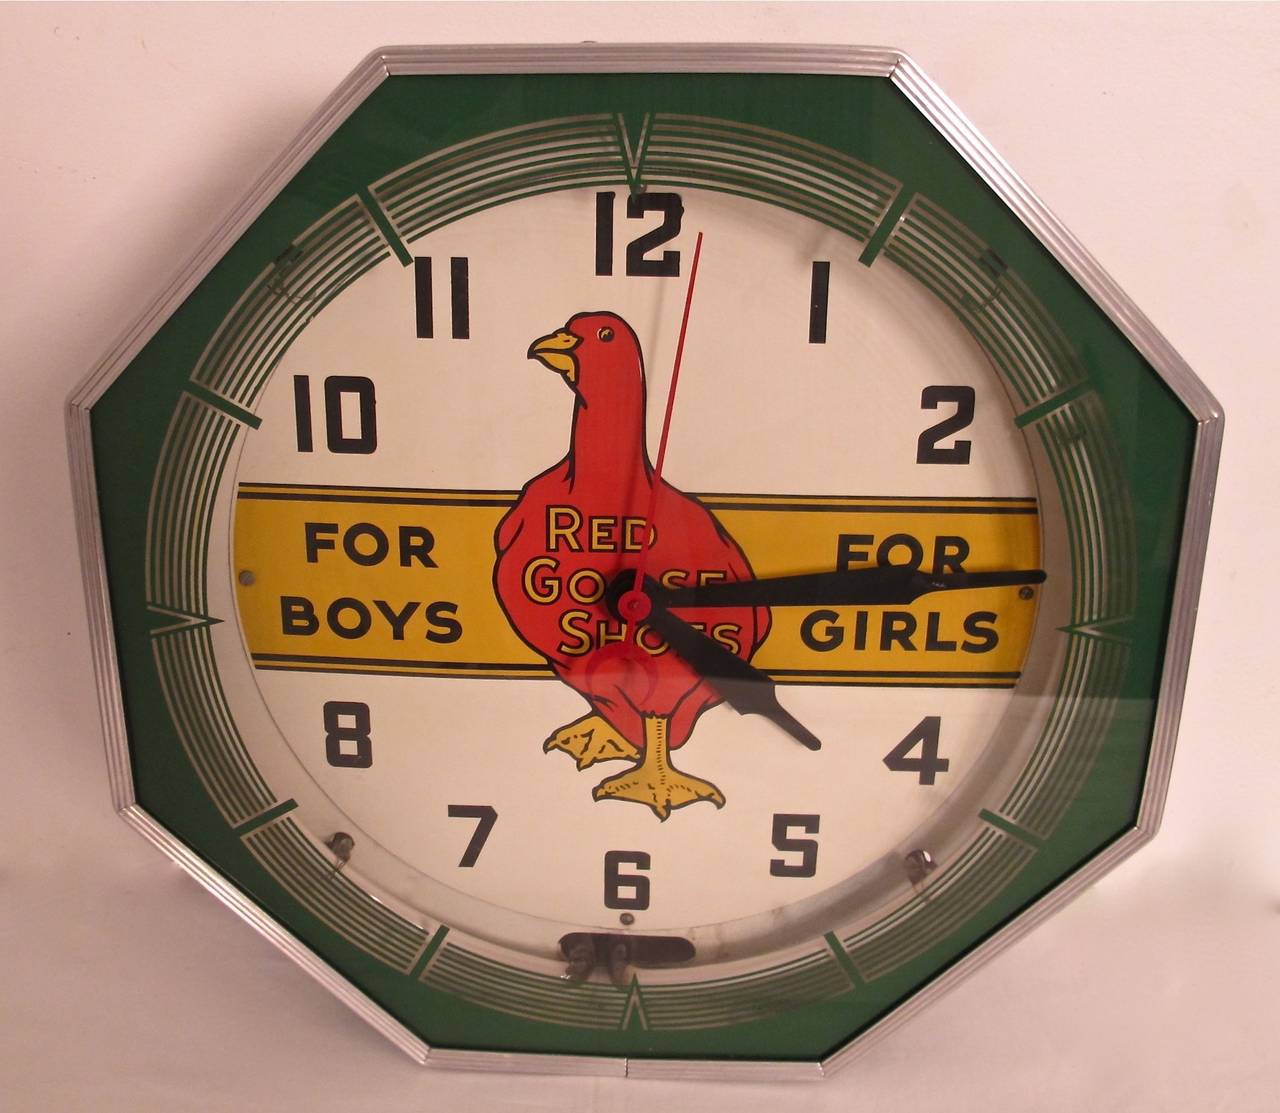 Vintage advertising clock for Red Goose Shoes. Chrome frame with reverse painted glass front. Reconditioned and in working order, keeps accurate time.